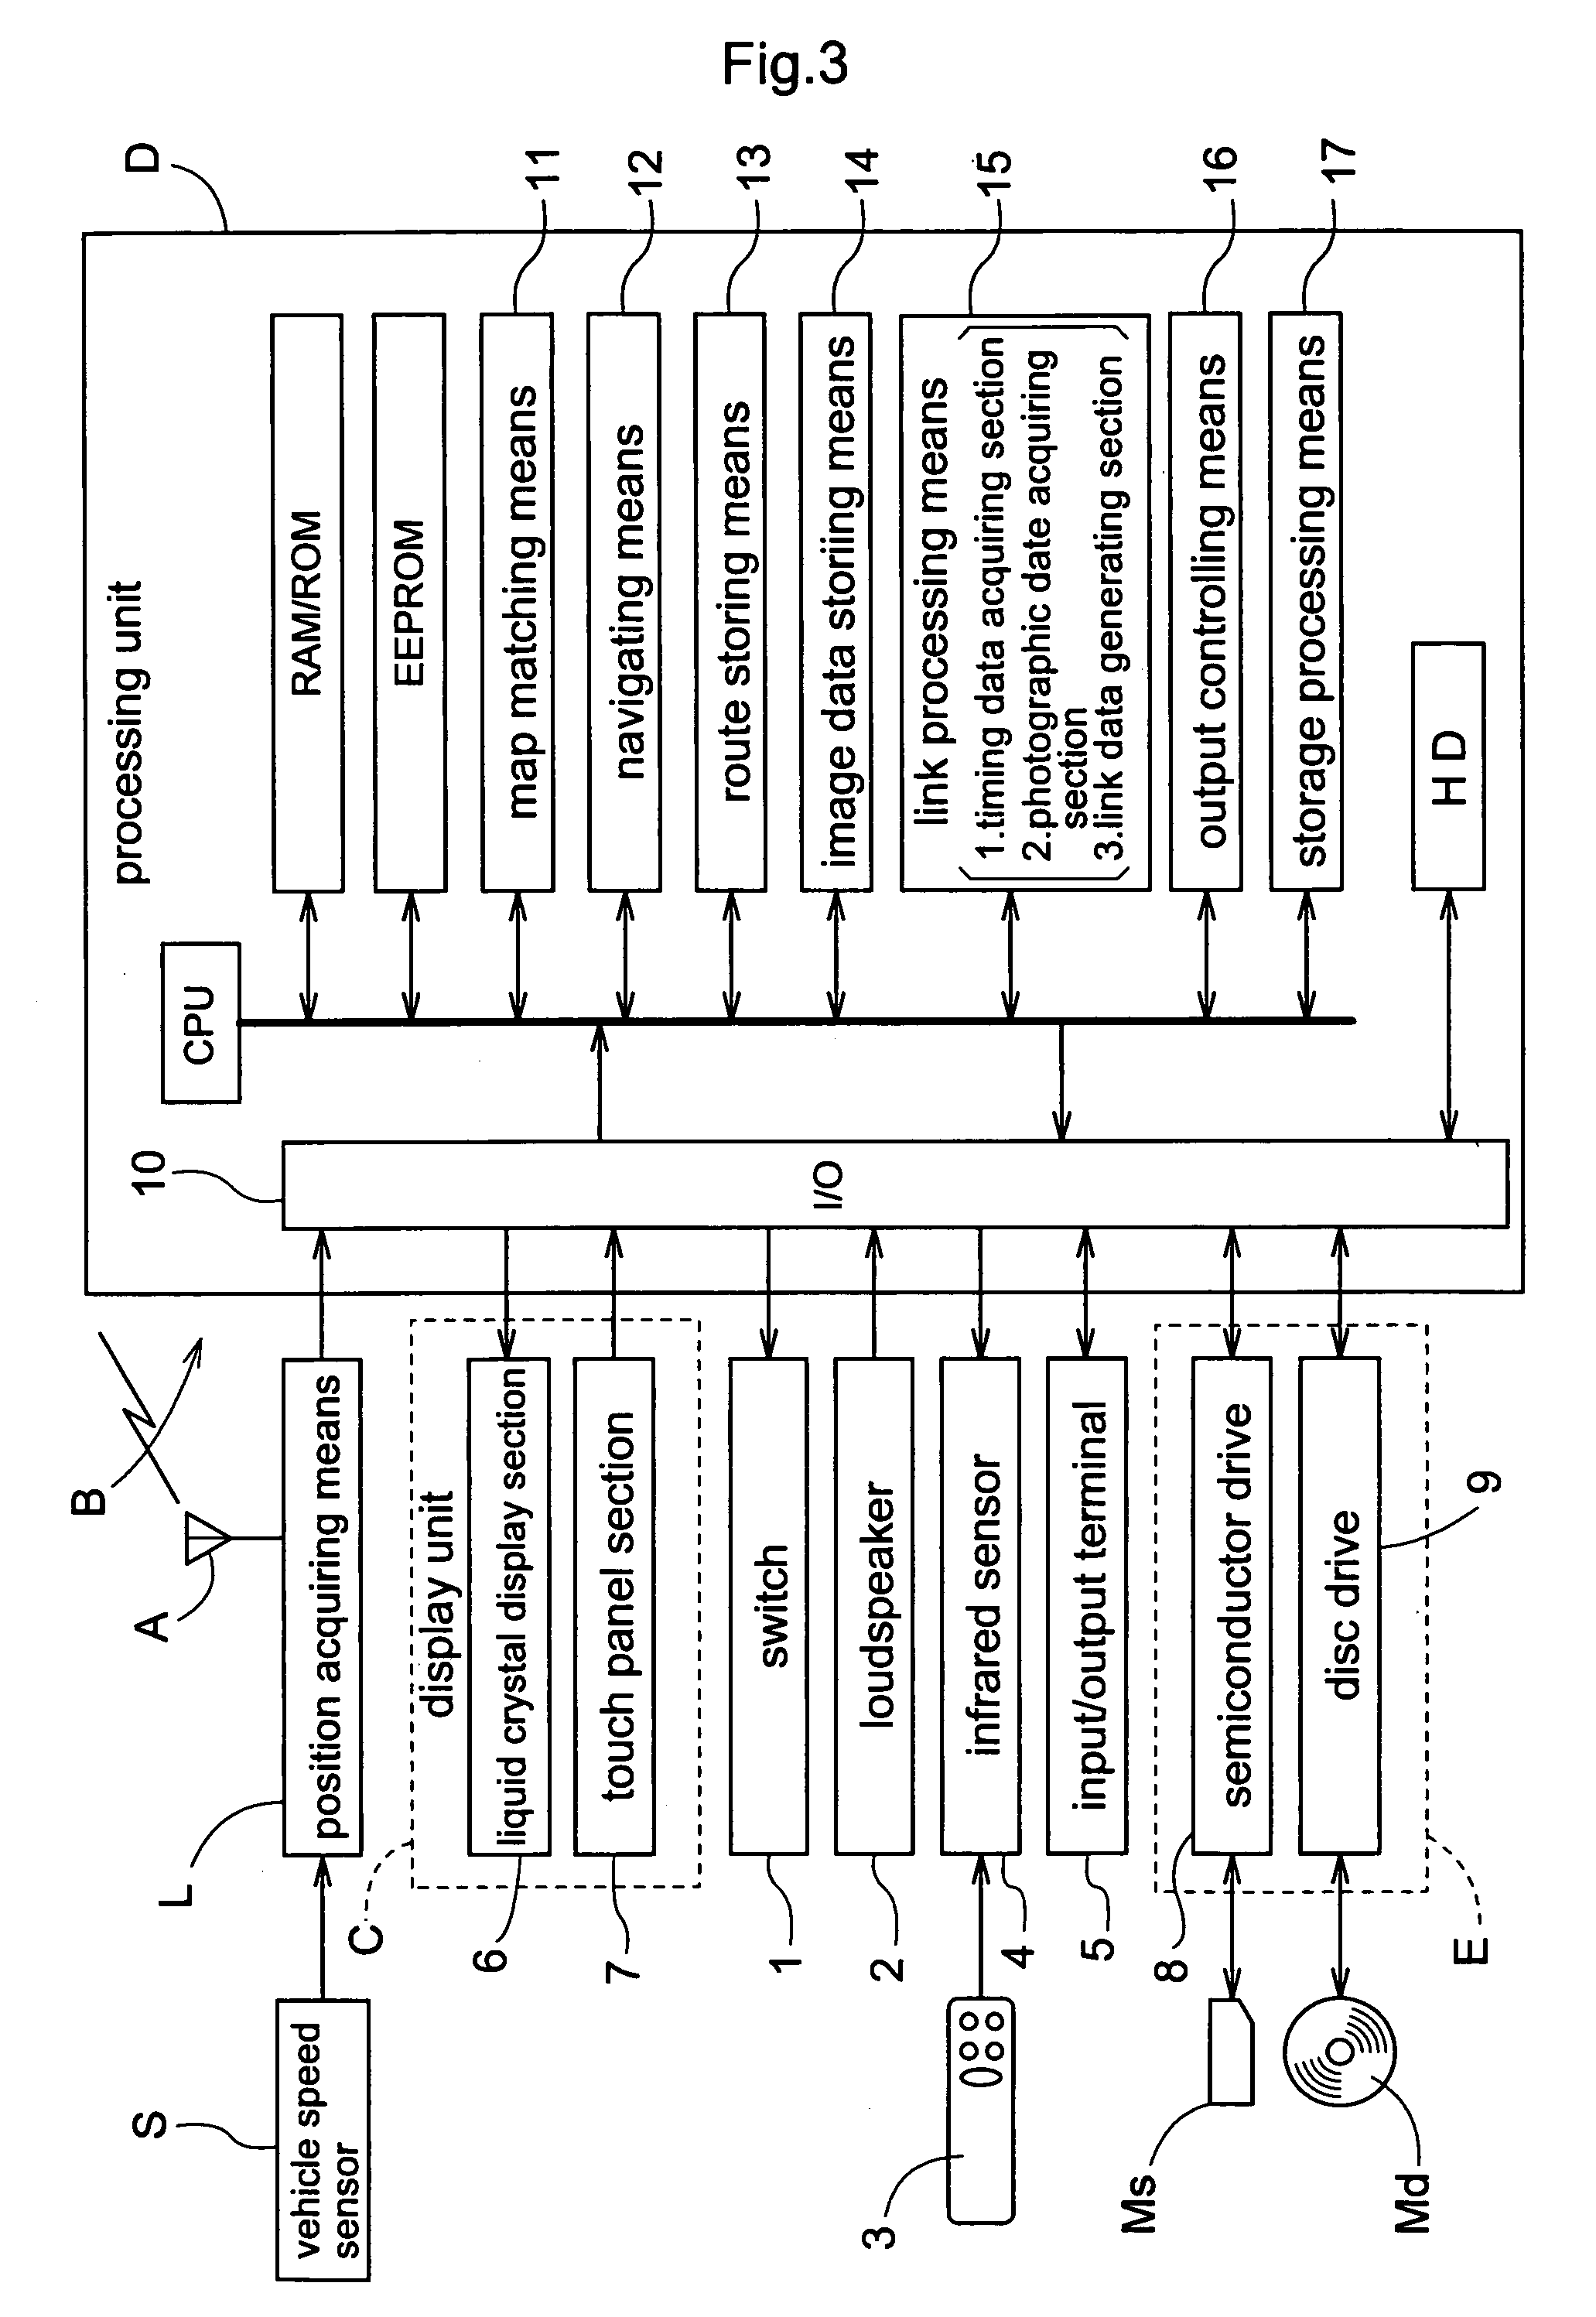 Image processing system, method and apparatus for correlating position data with image data